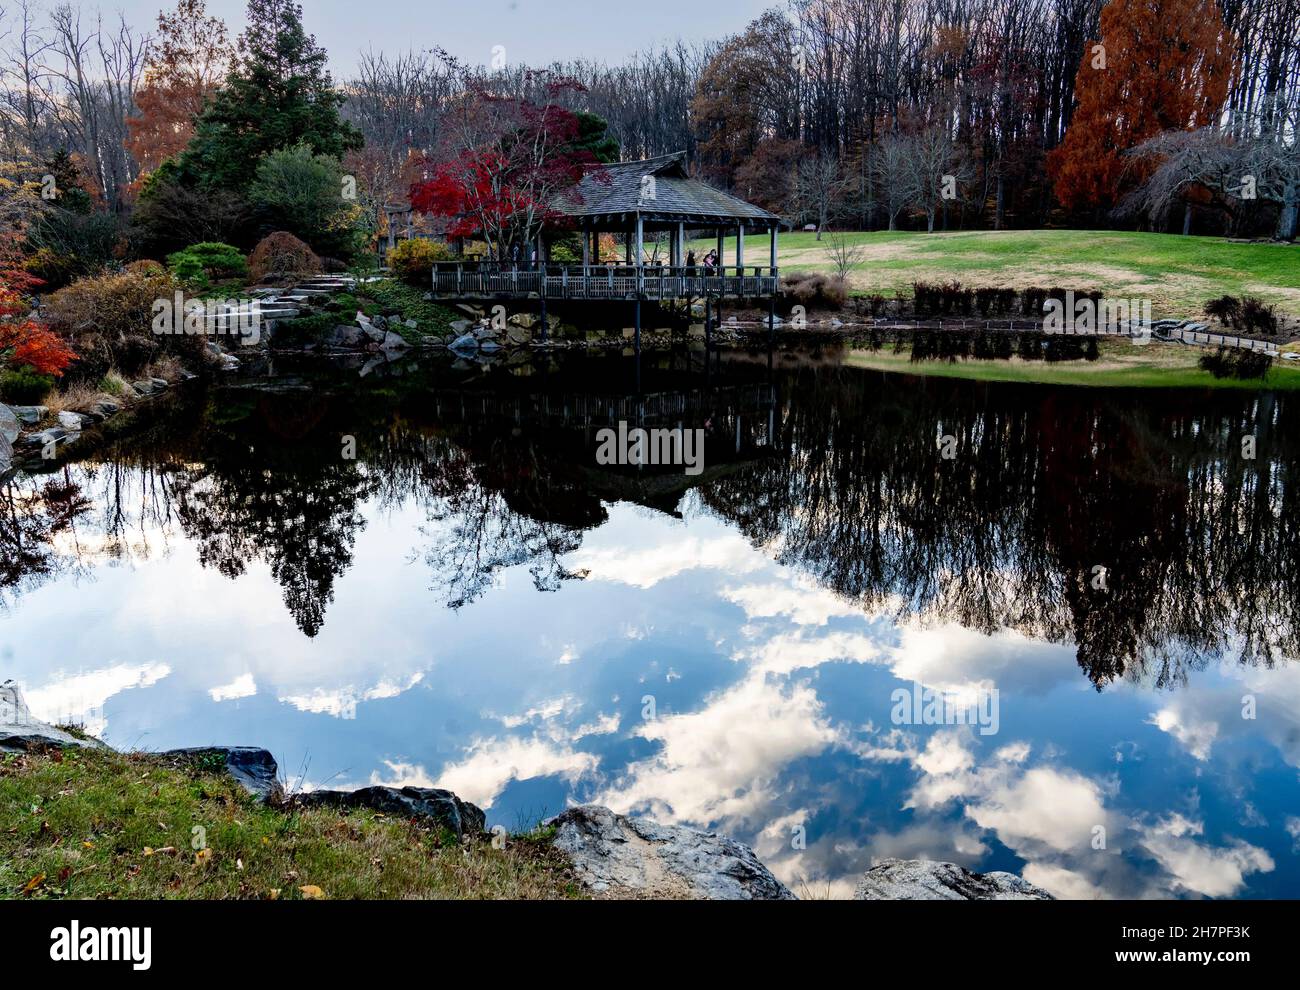 Cloud formation echoed in the clear waters of a park pond. Stock Photo